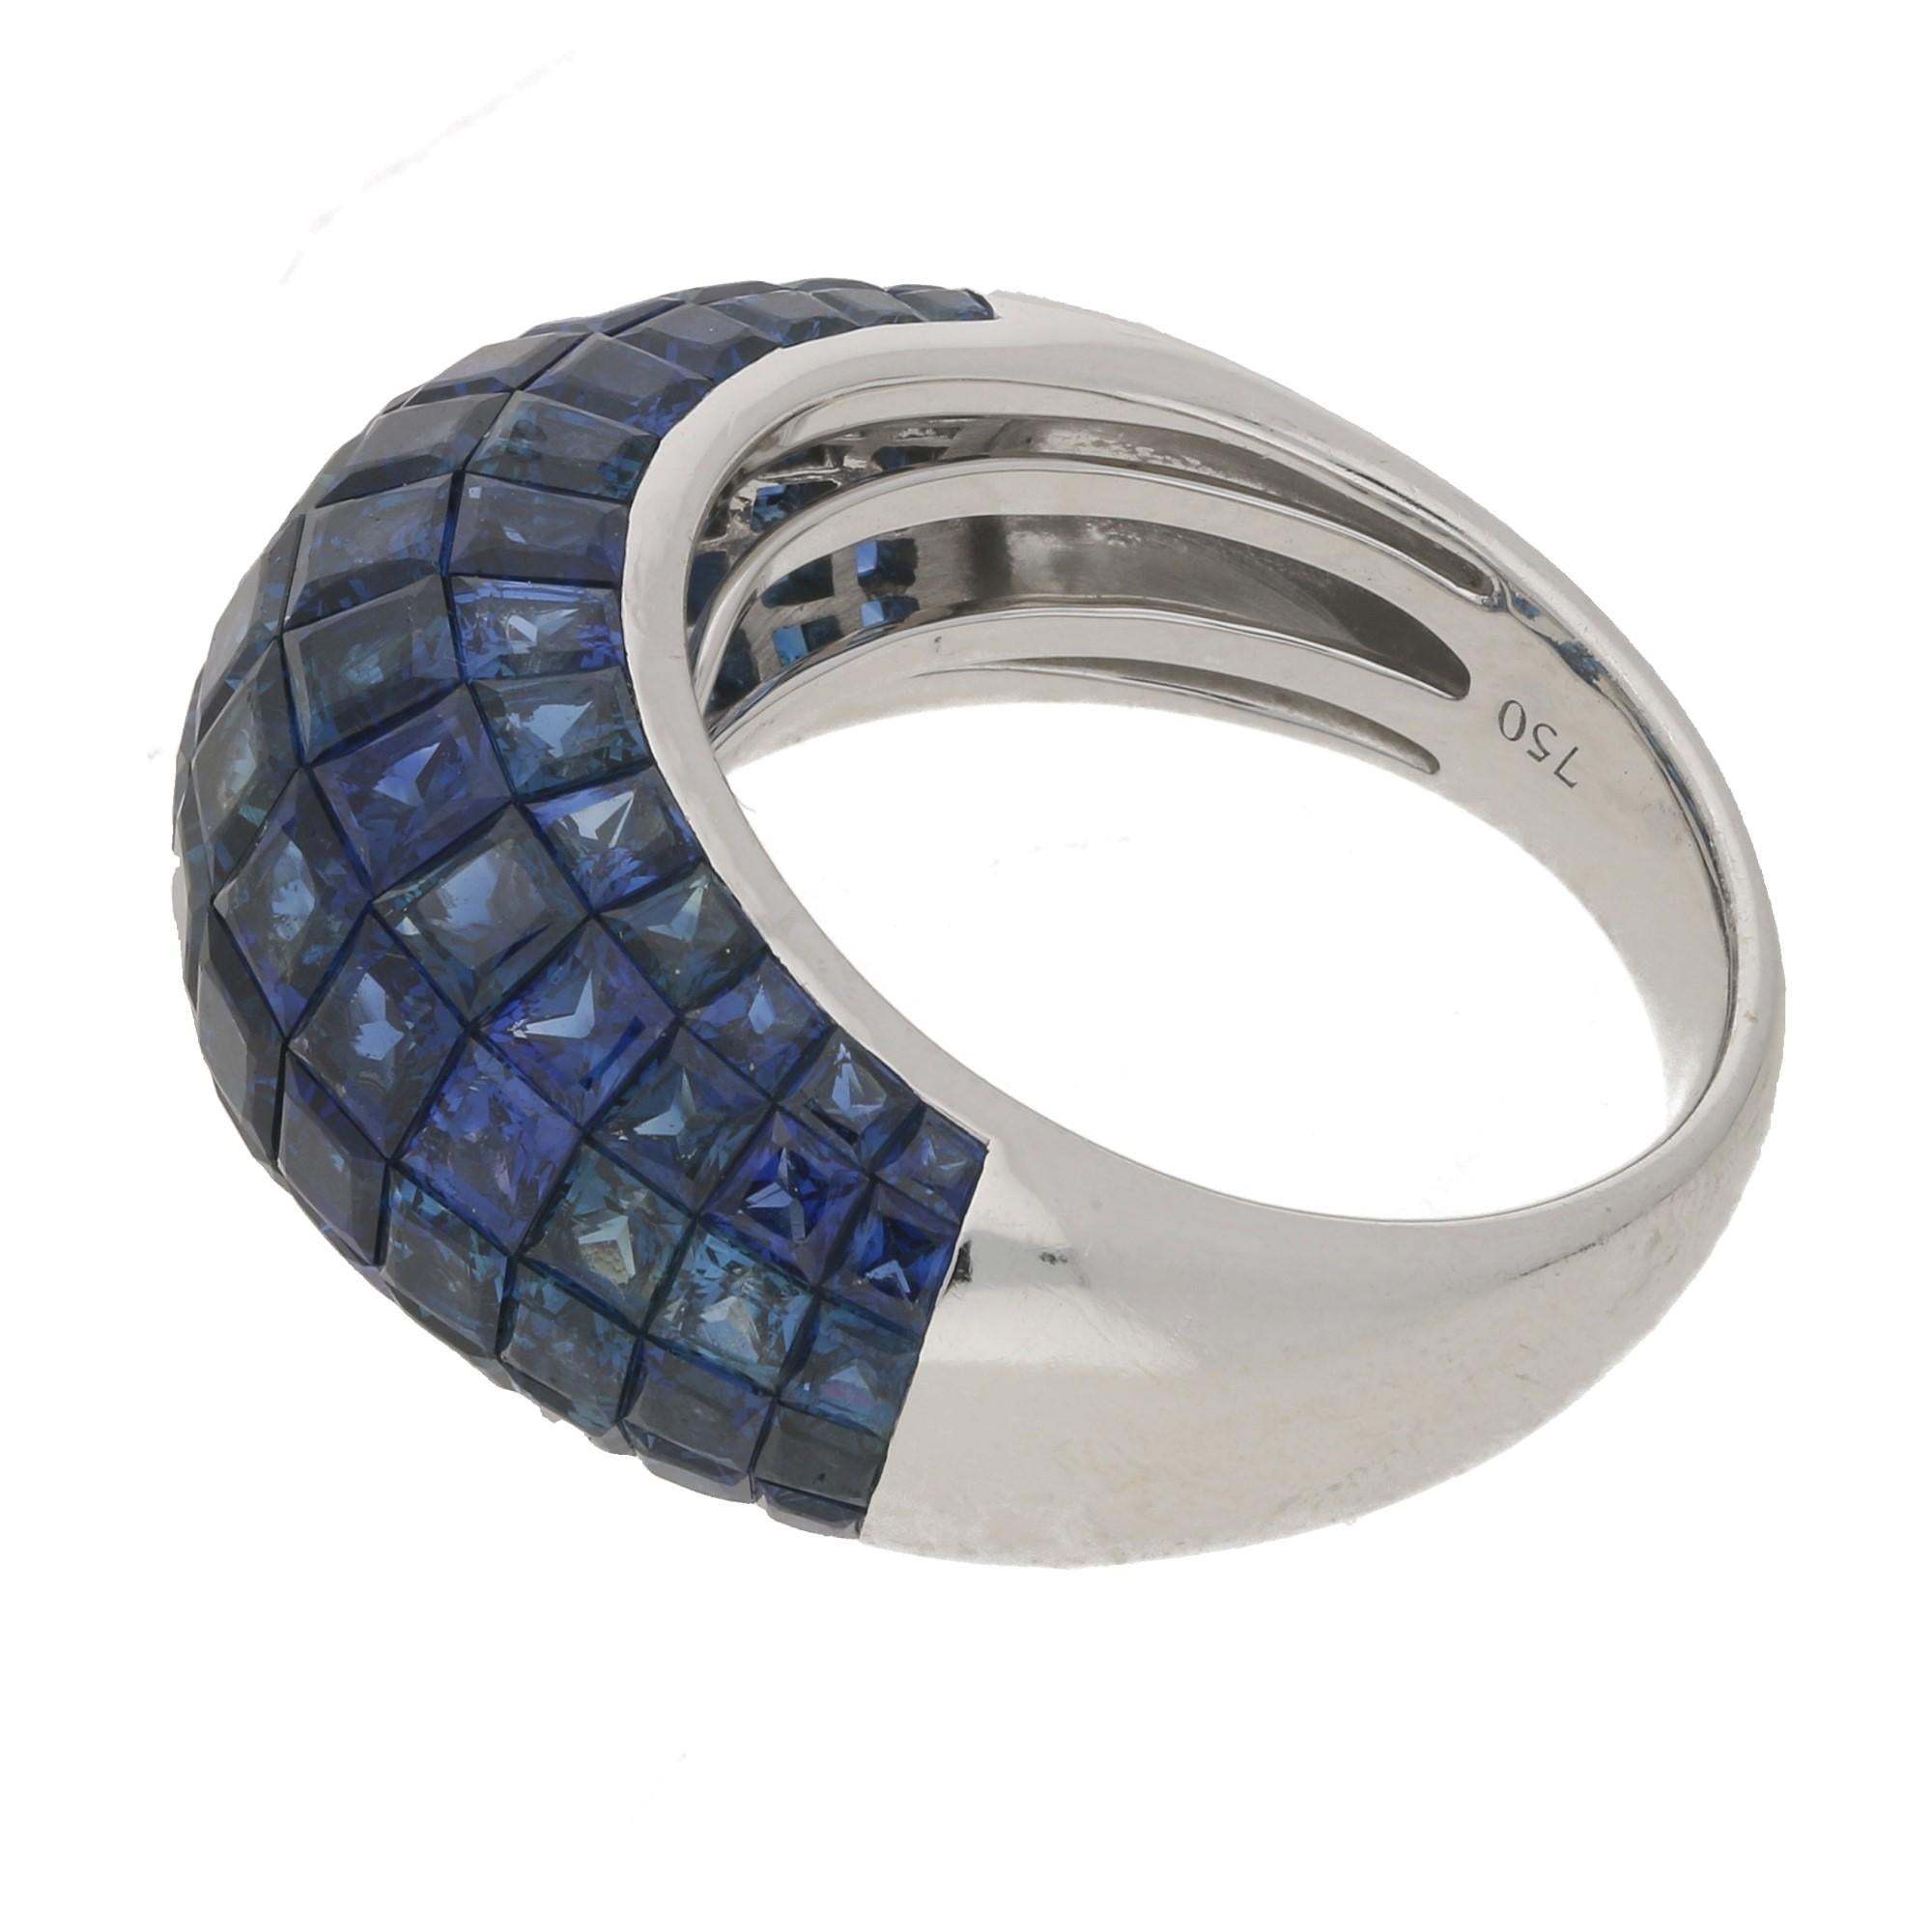 An amazing invisibly set sapphire bombe ring. Individually the square shaped sapphires are of exquisite quality and are French cut for maximum sparkle. The16.69cts of sapphires are set in 6 rows of graduated sizes forming a bombe style of ring, You